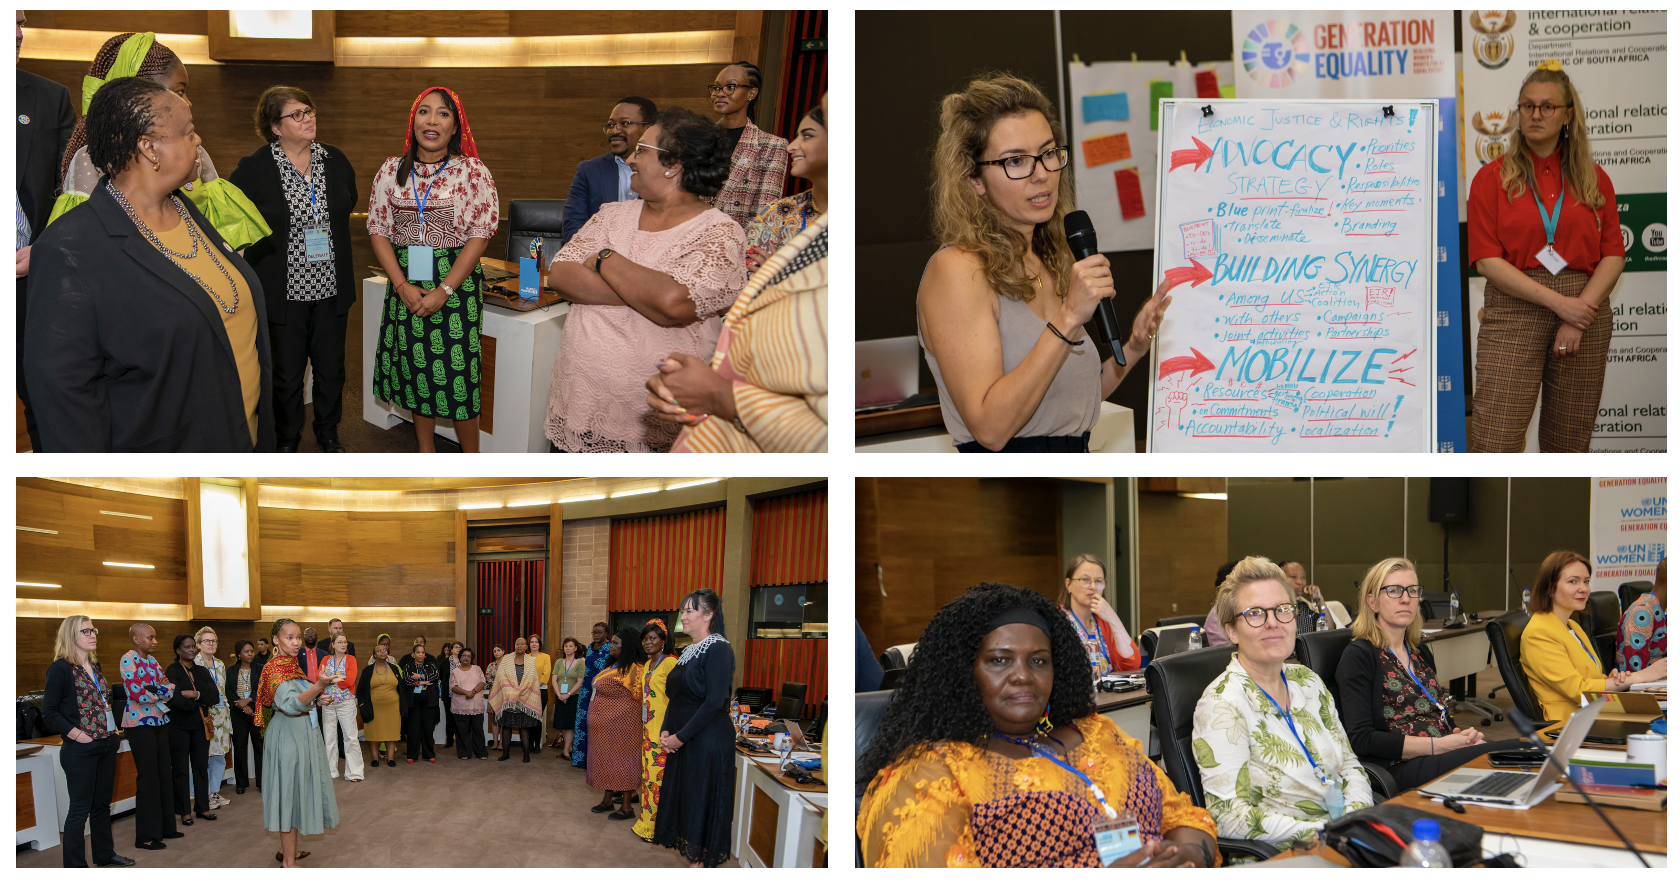 Participants of the Economic Justice Rights Leaders Retreat included participants from governments, the private sector, and civil society organizations from different countries. Photo: UN Women/ Rebecca Hearfield